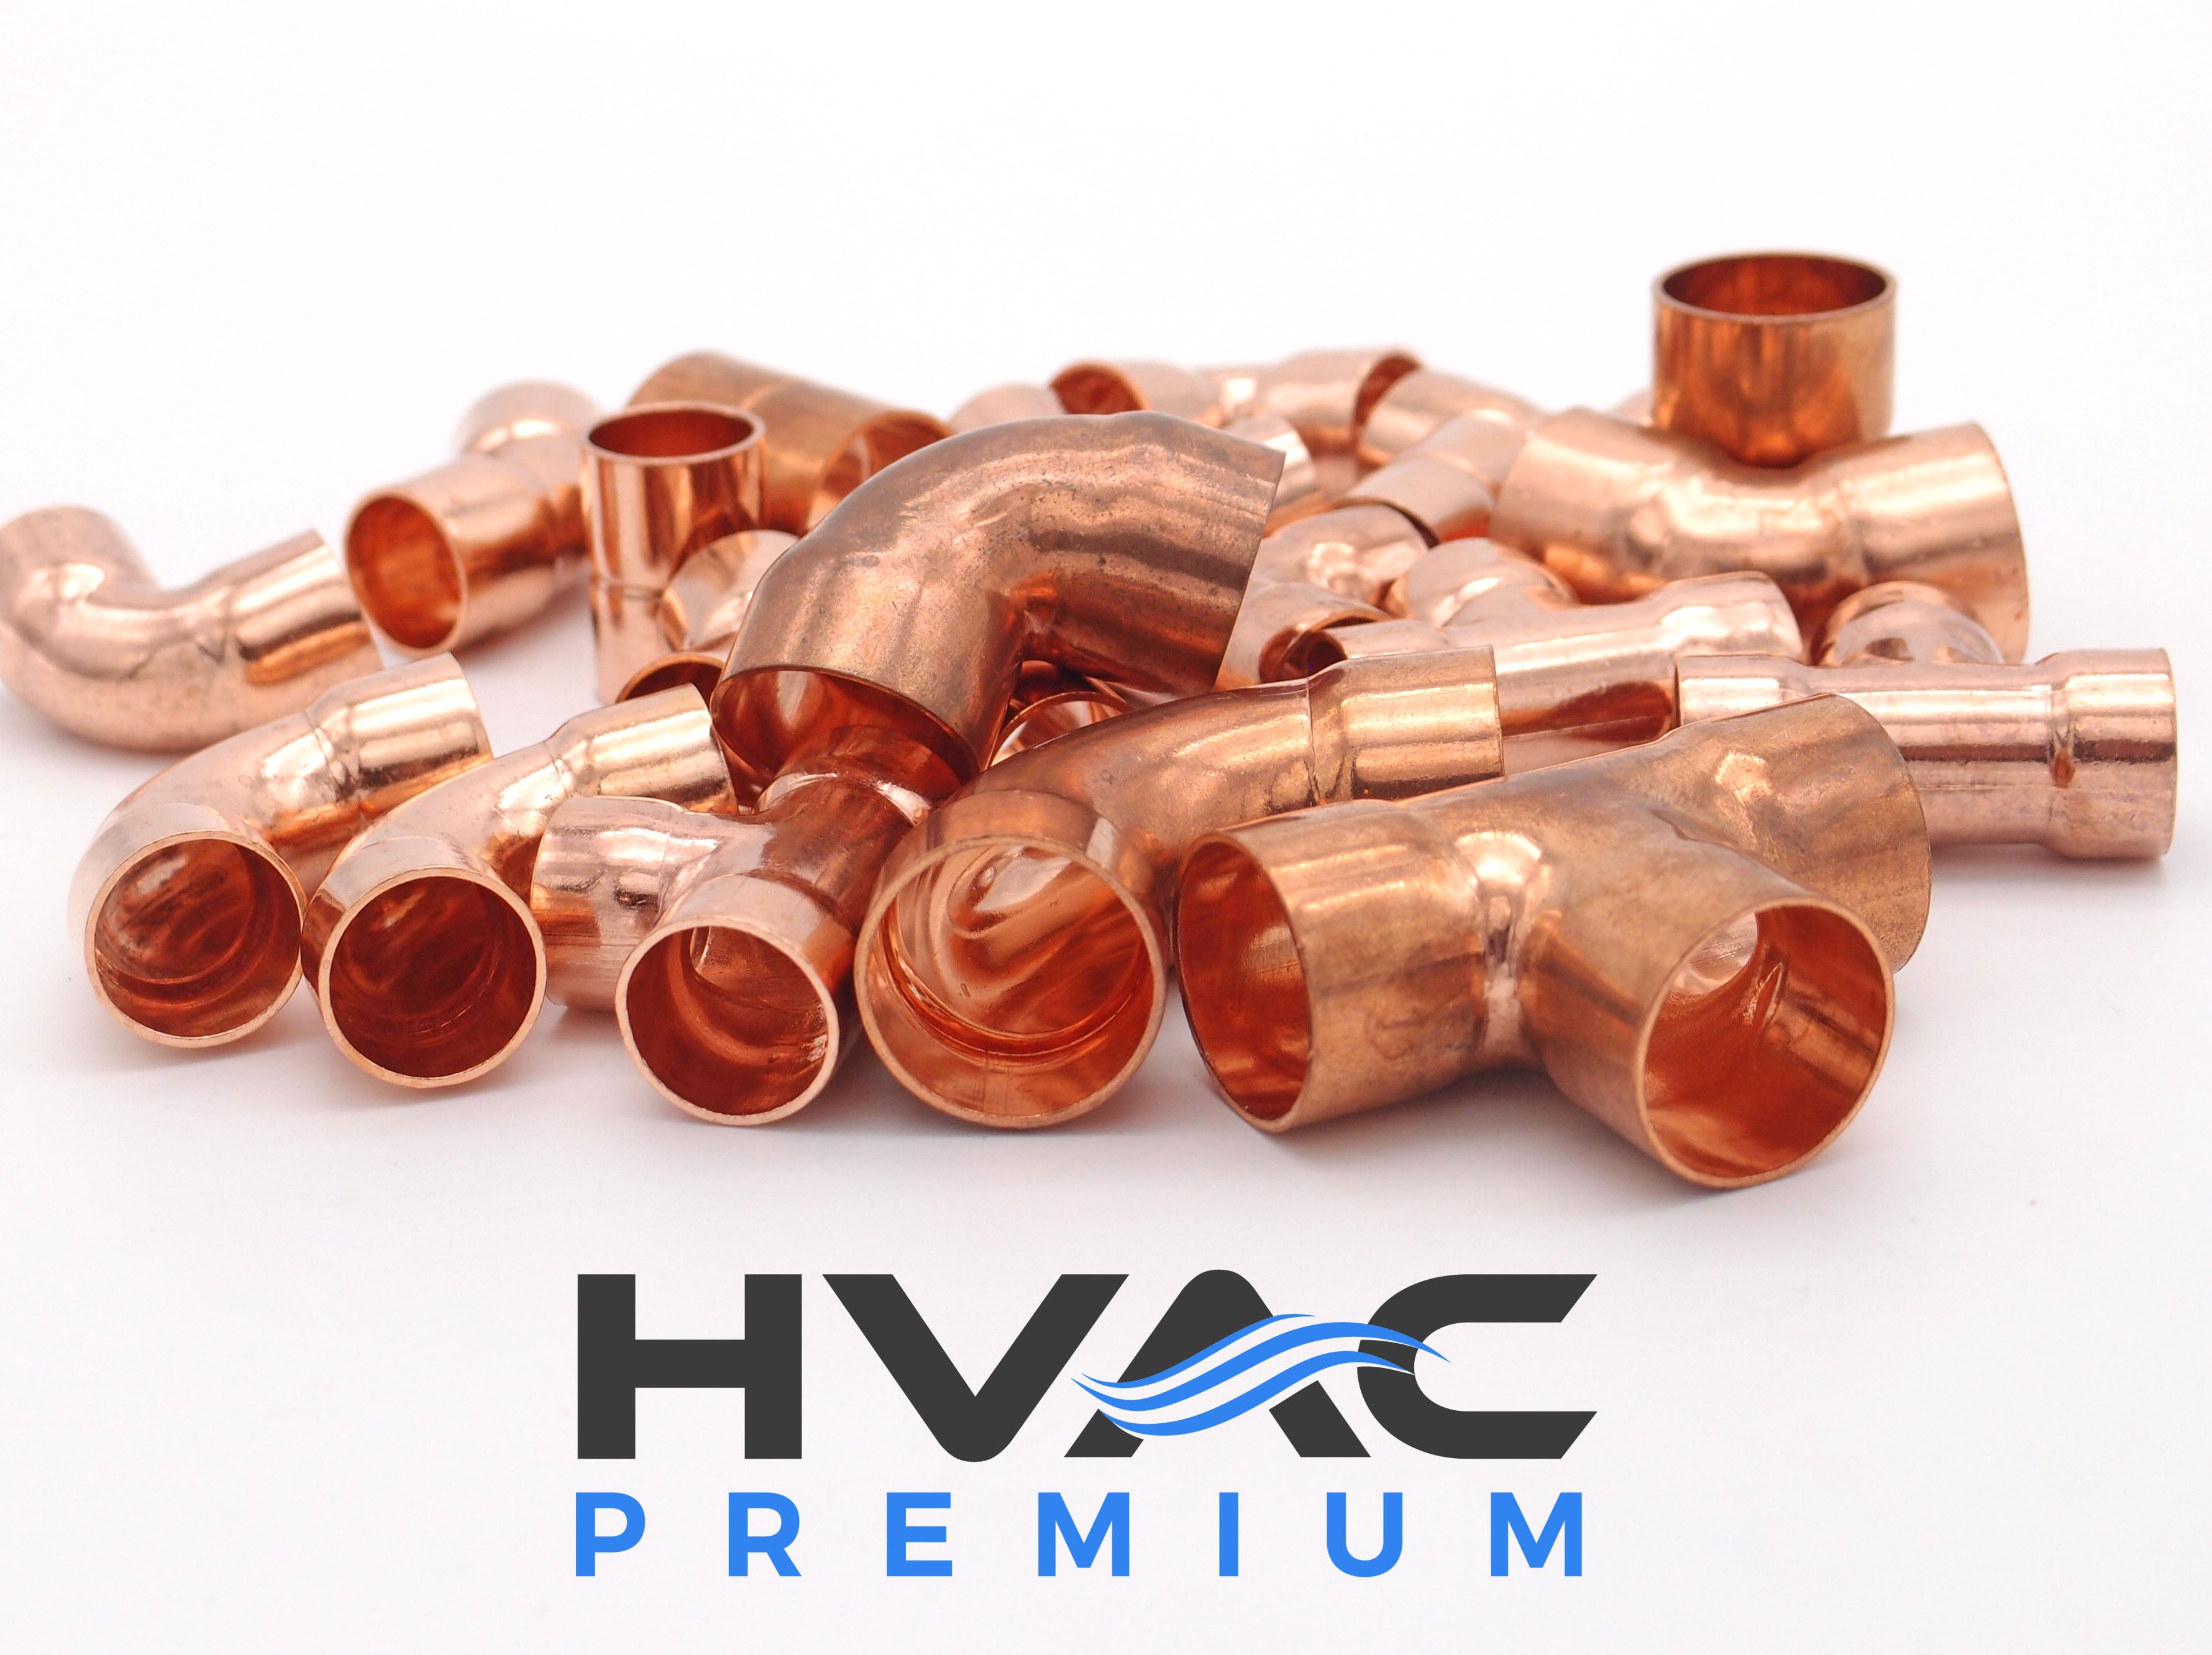 Copper Fitting 1/2 to 1/4 (HVAC Dimensions) Reducer / Increaser Copper Coupling & HVAC – 3/8 to 1/8 (Plumbing Inner Dimensions) 99.9% Pure Copper - 10 Pack